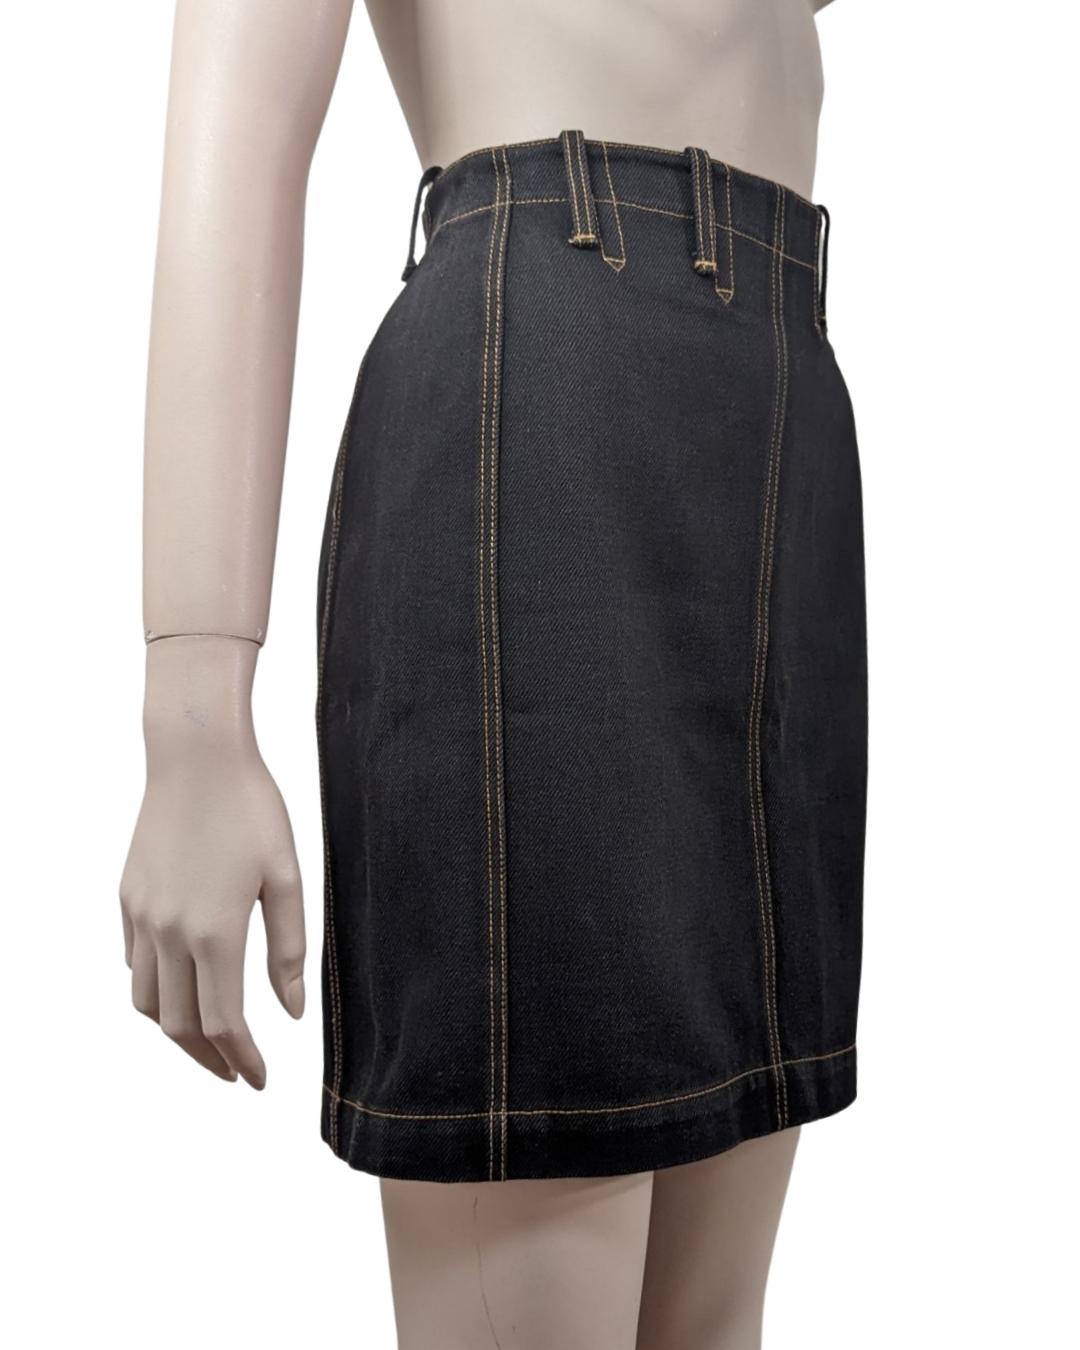 Azzedine Alaïa S/S 1991 High Waist Lace-up Denim Skirt In Excellent Condition For Sale In GOUVIEUX, FR